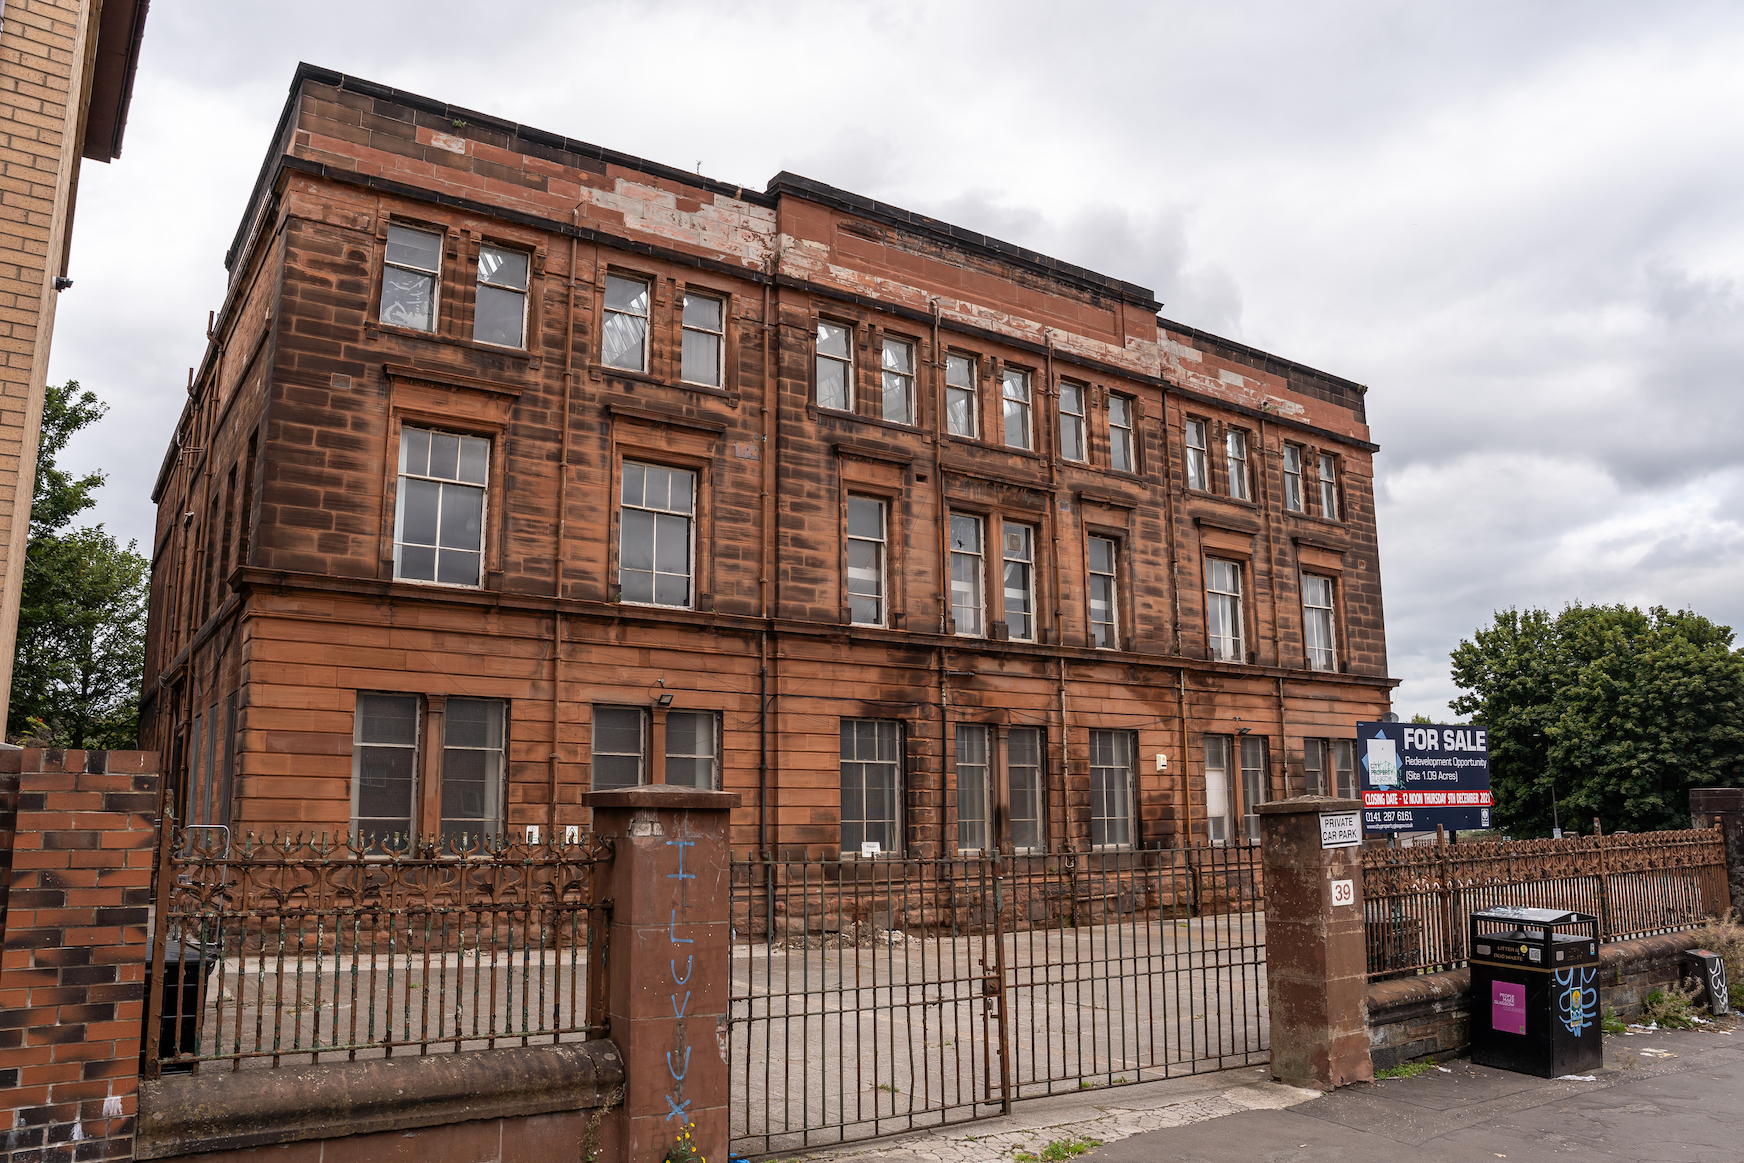 Work begins on restoration of 19th century school in Glasgow's west end as part of 49-home development